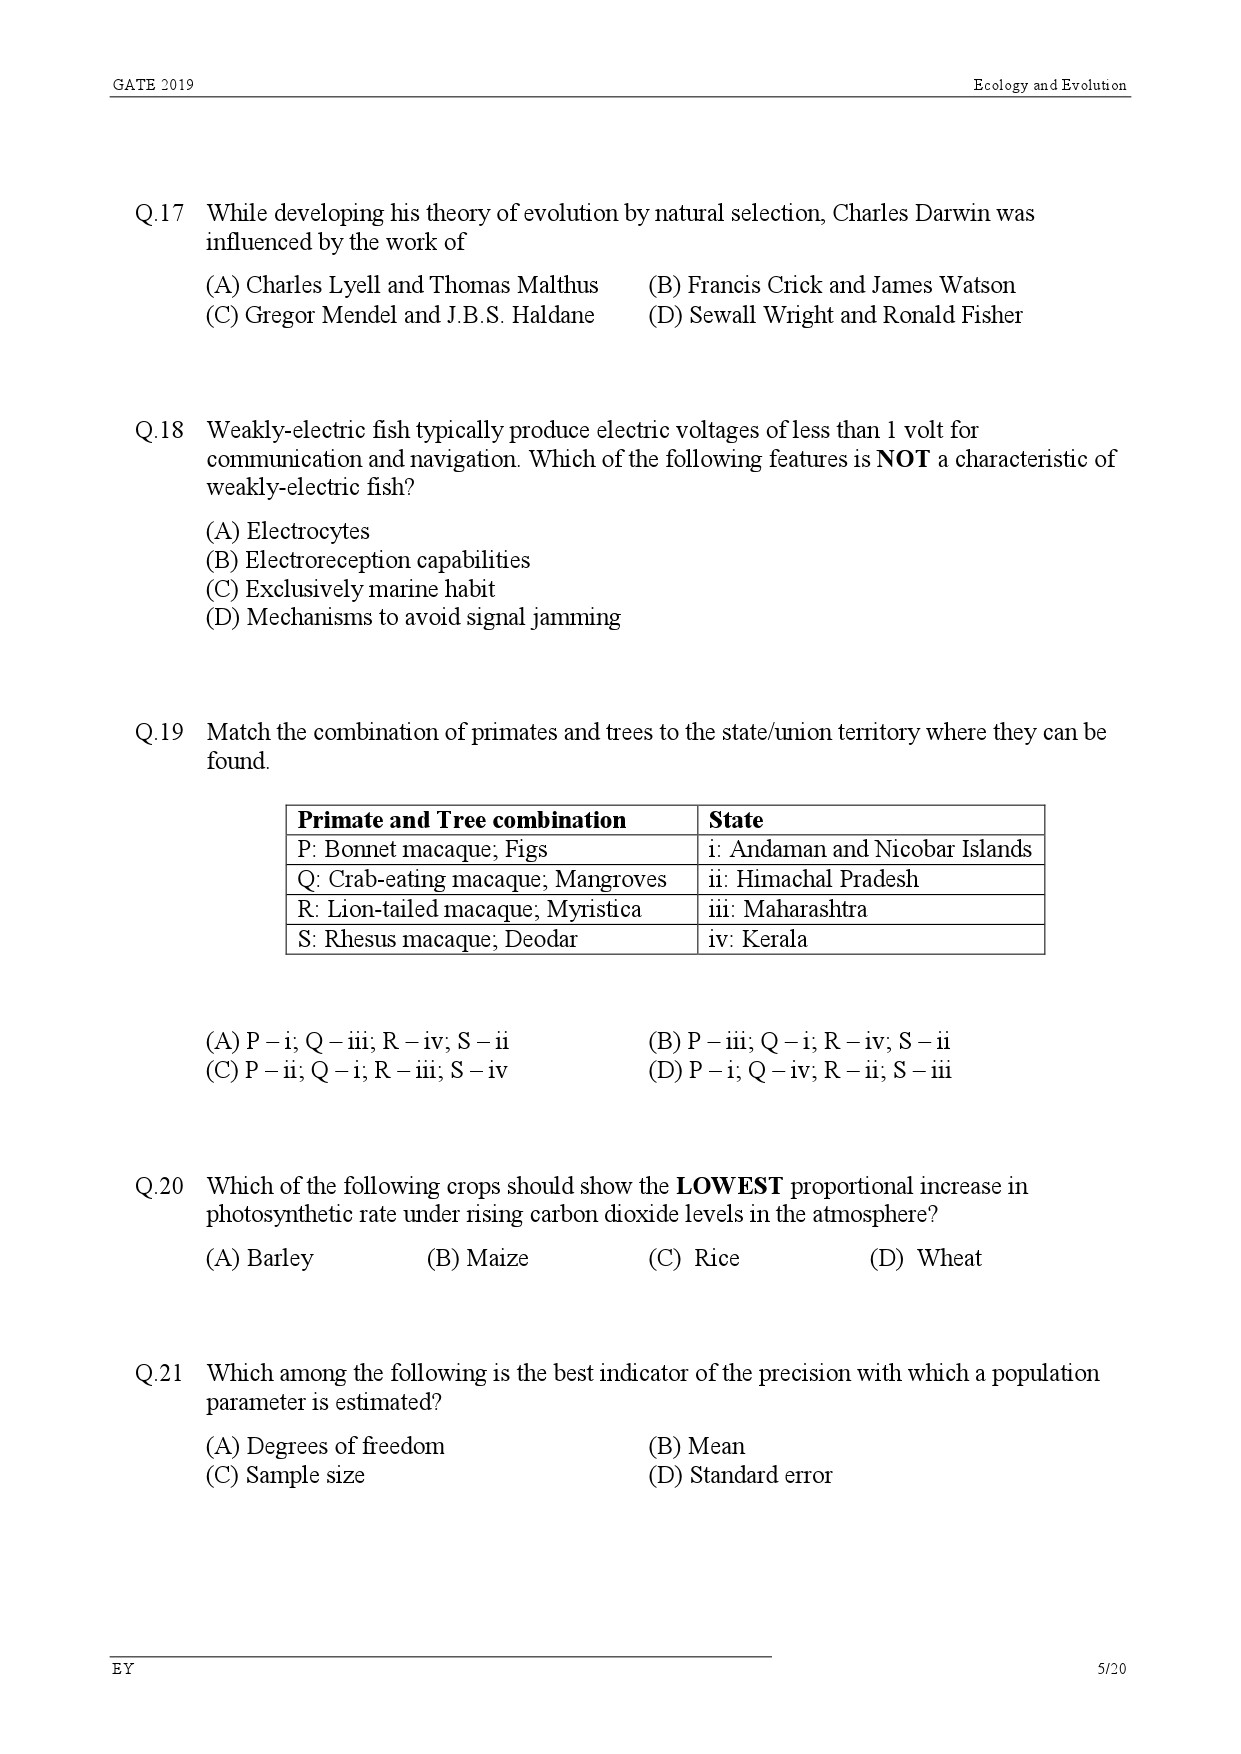 GATE Exam Question Paper 2019 Ecology and Evolution 8